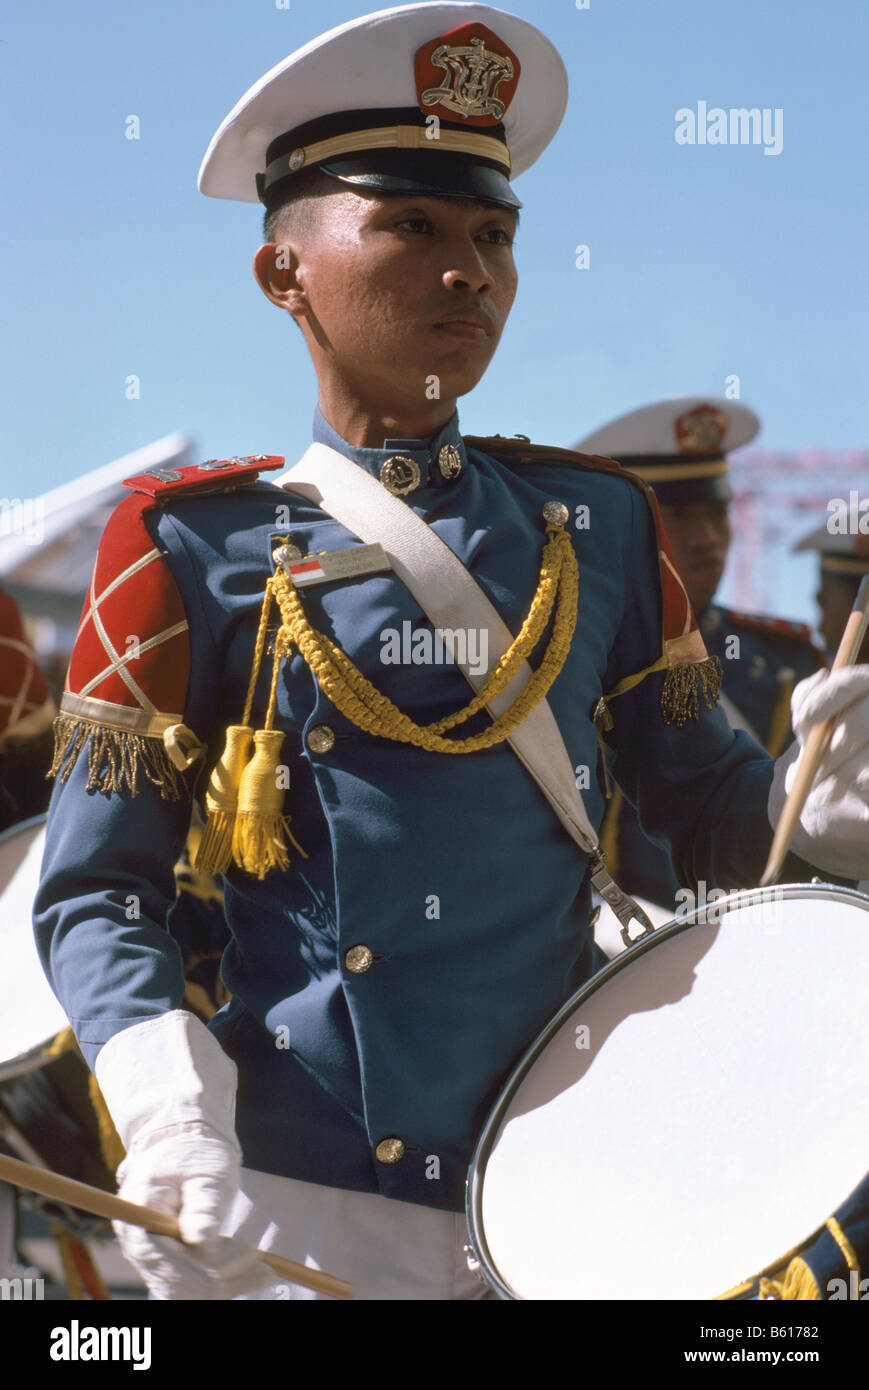 Drummer with Drum from Indonesia, Member of Naval Marching Band from KRI Dewaruci (Dewa Ruci) Tall Ship owned by Indonesian Navy Stock Photo